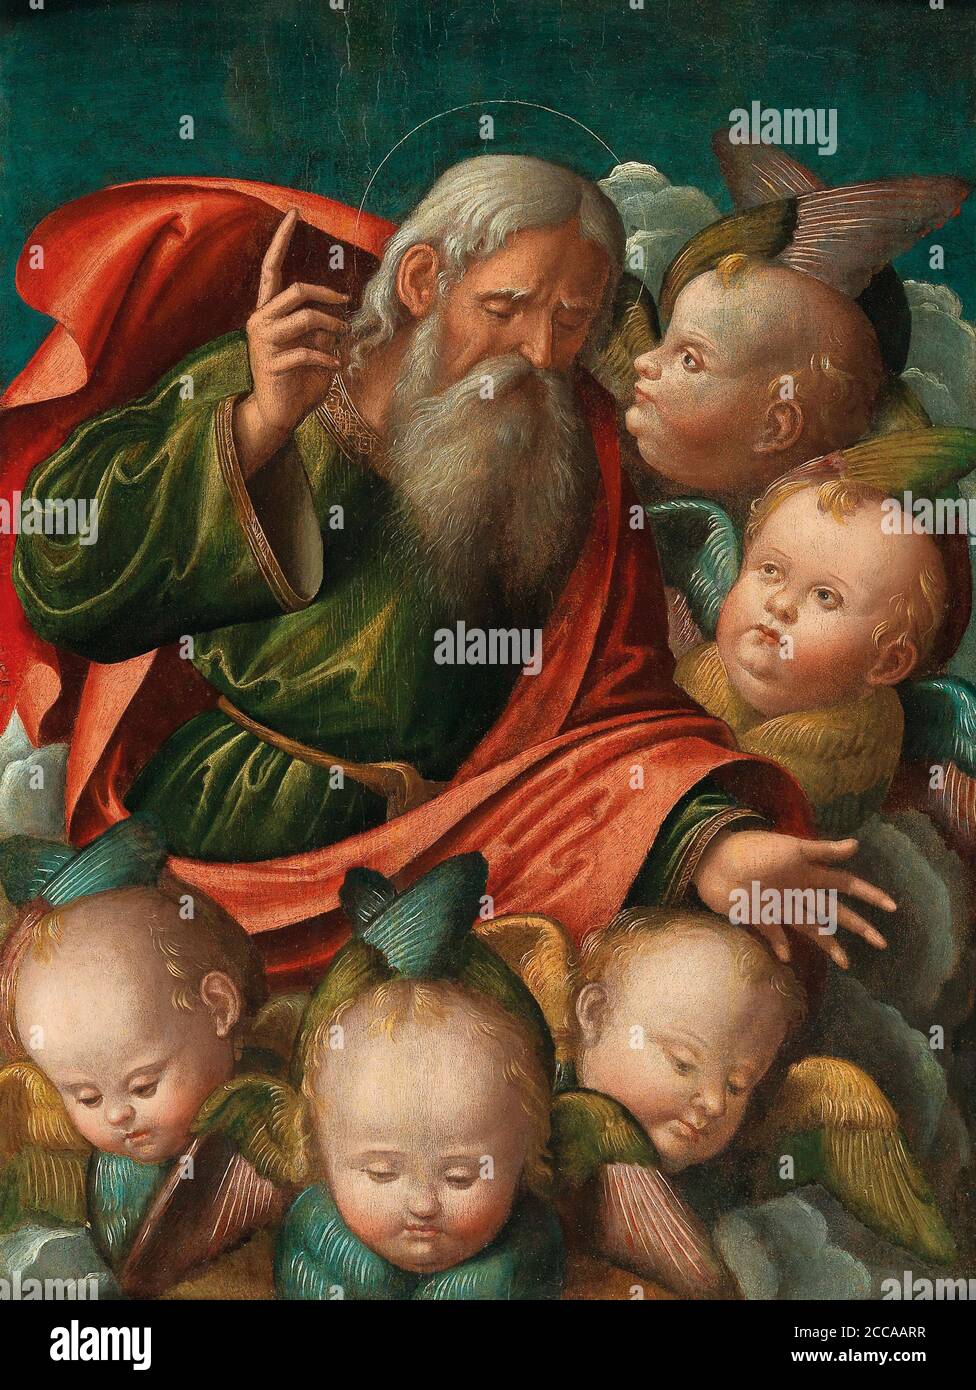 God the Father, surrounded by angels. Museum: PRIVATE COLLECTION. Author: Carrari, Baldassarre, the Younger. Stock Photo